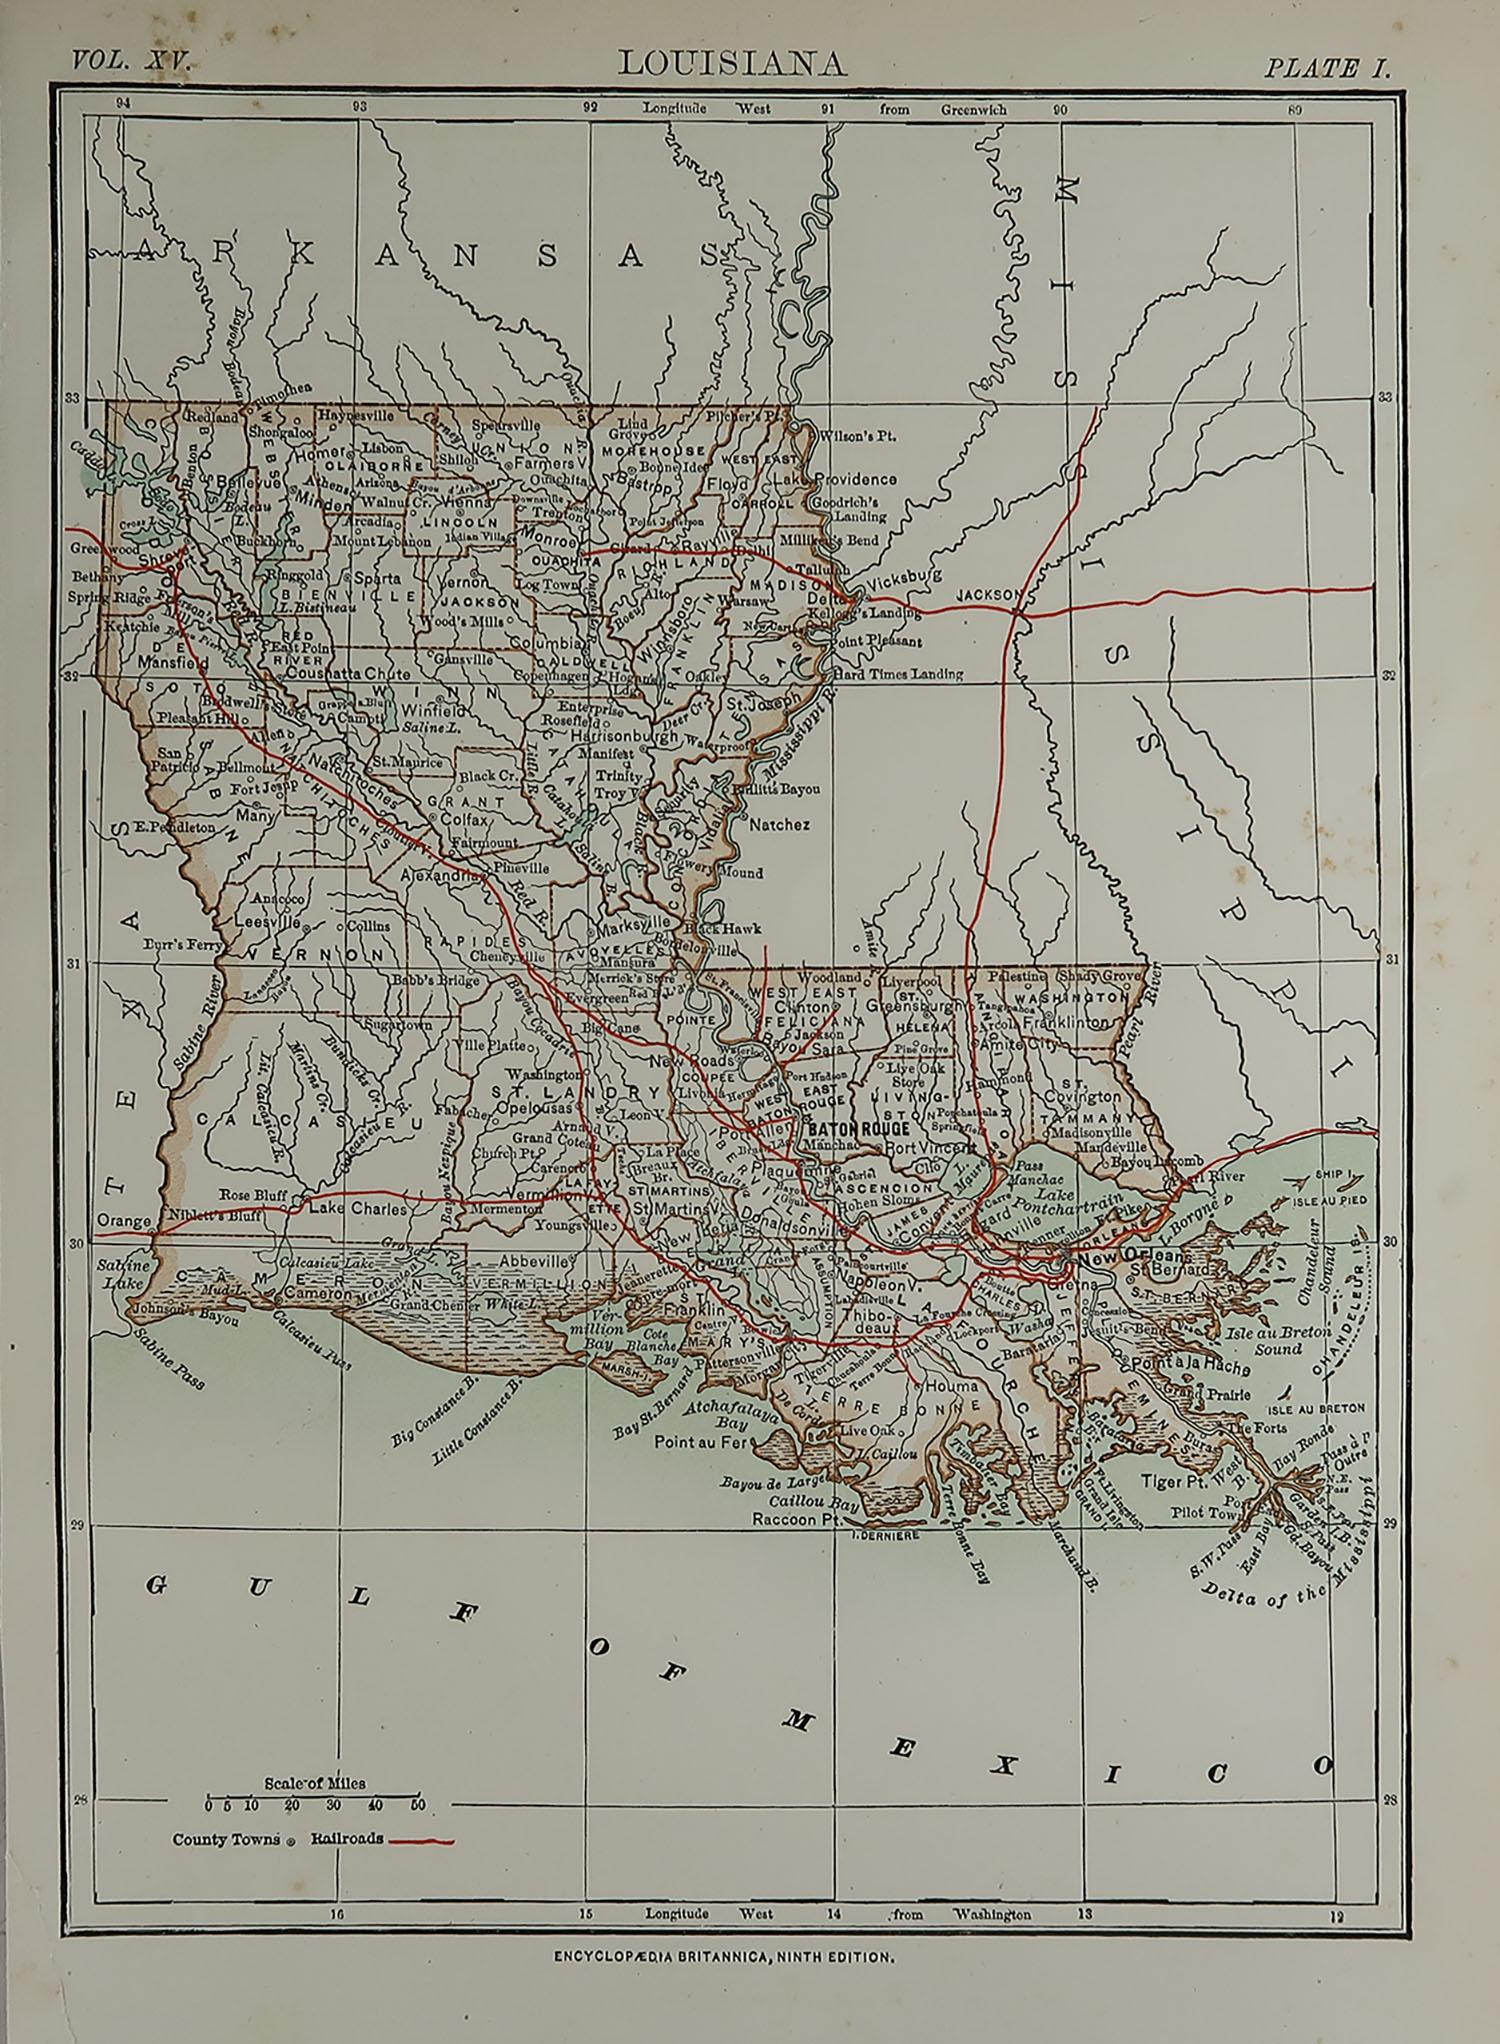 Great map of Louisiana

Drawn and Engraved by W. & A.K. Johnston

Published By A & C Black, Edinburgh.

Original colour

Some minor foxing and a repair to bottom left corner

Unframed.








